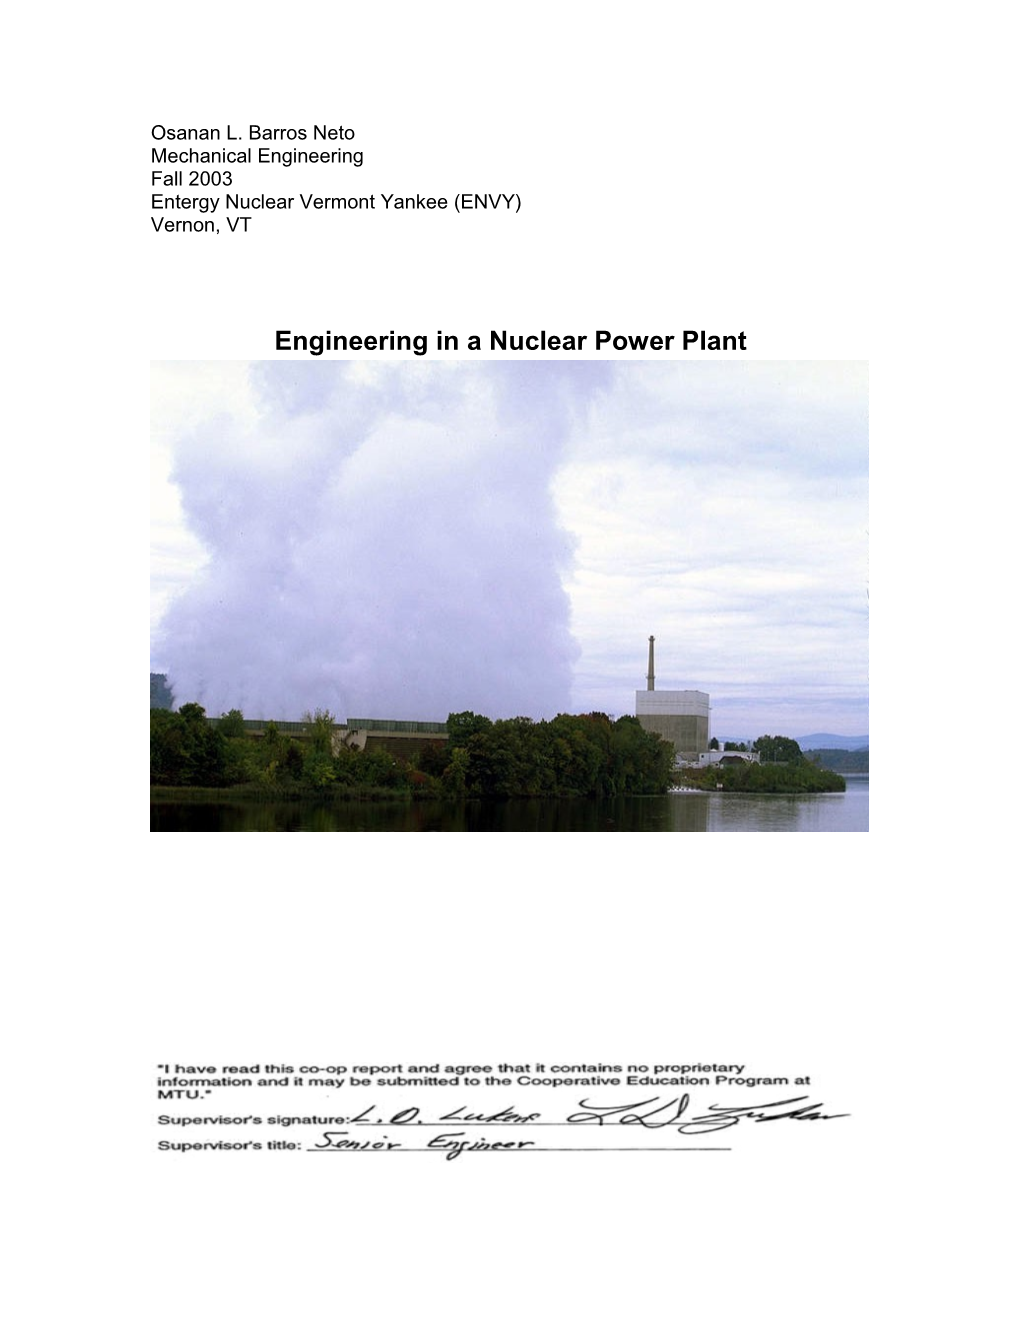 Engineering in a Nuclear Power Plant